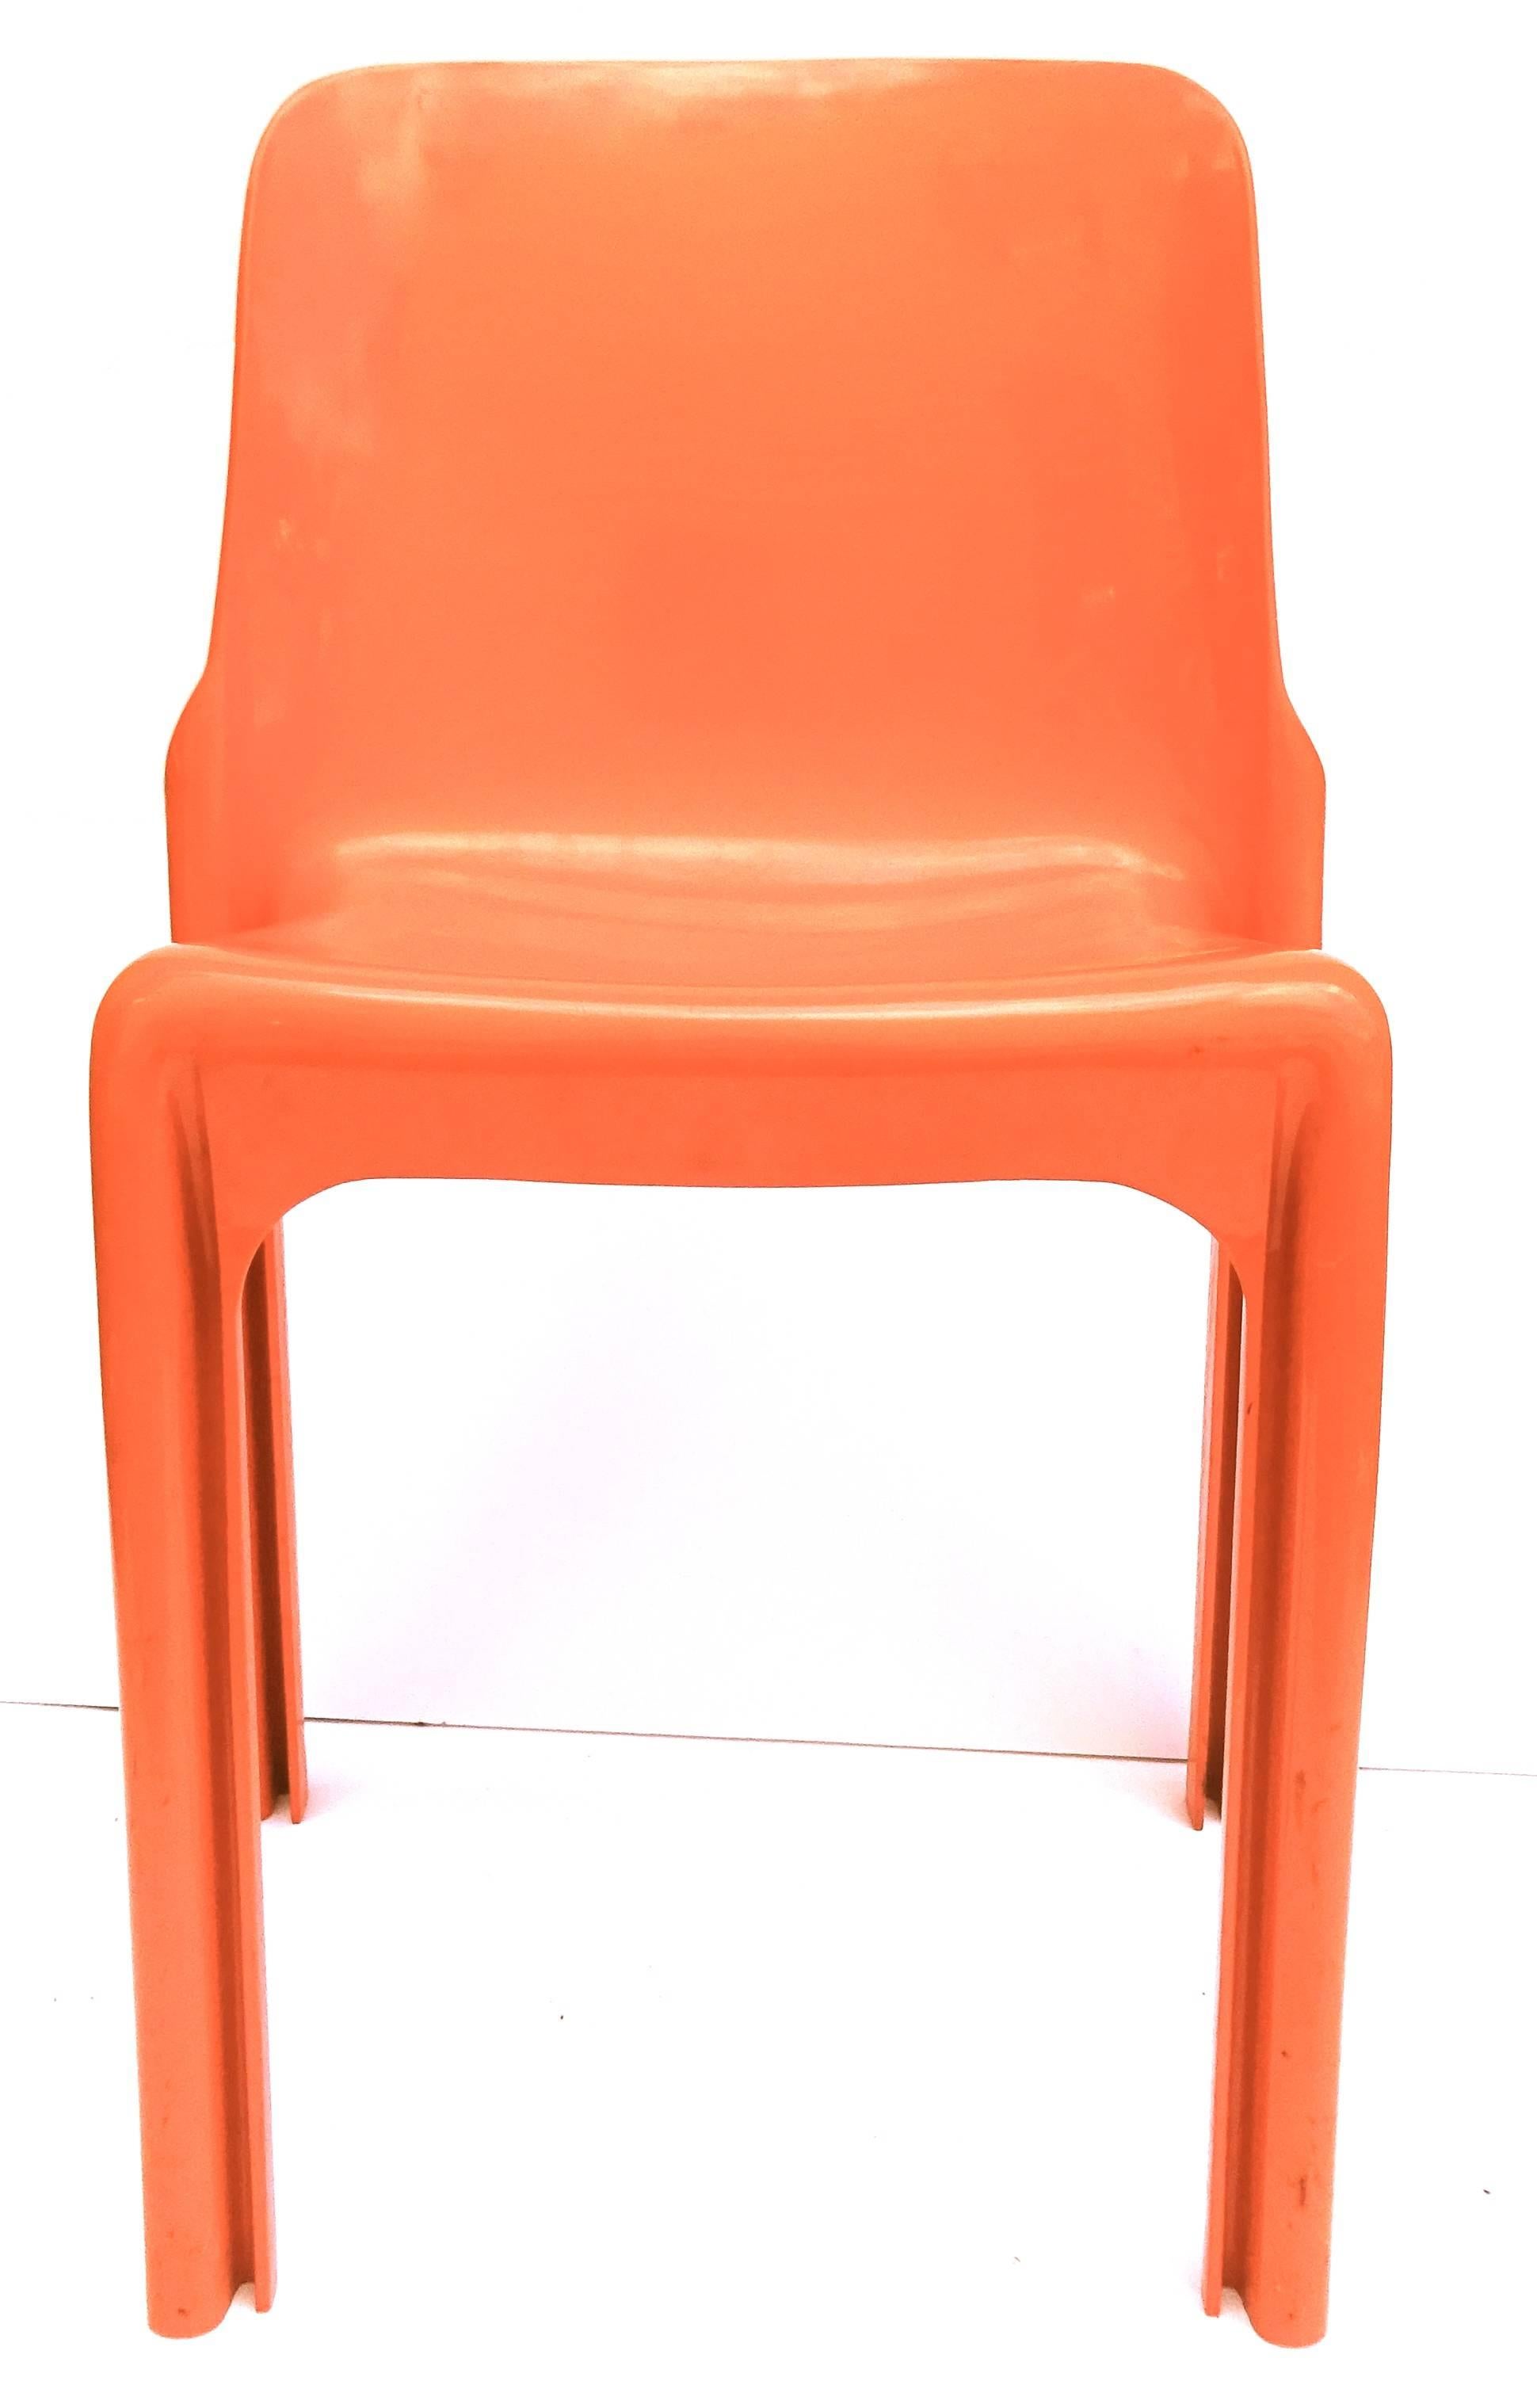 Fun and fabulous set of four Vico Magistretti dining chairs. Italy, c. 1970.  This is his Selene chair model, made for famed manufacturer Artemide.  They are in a great bright orange color way.  We also have the matching square dining table which